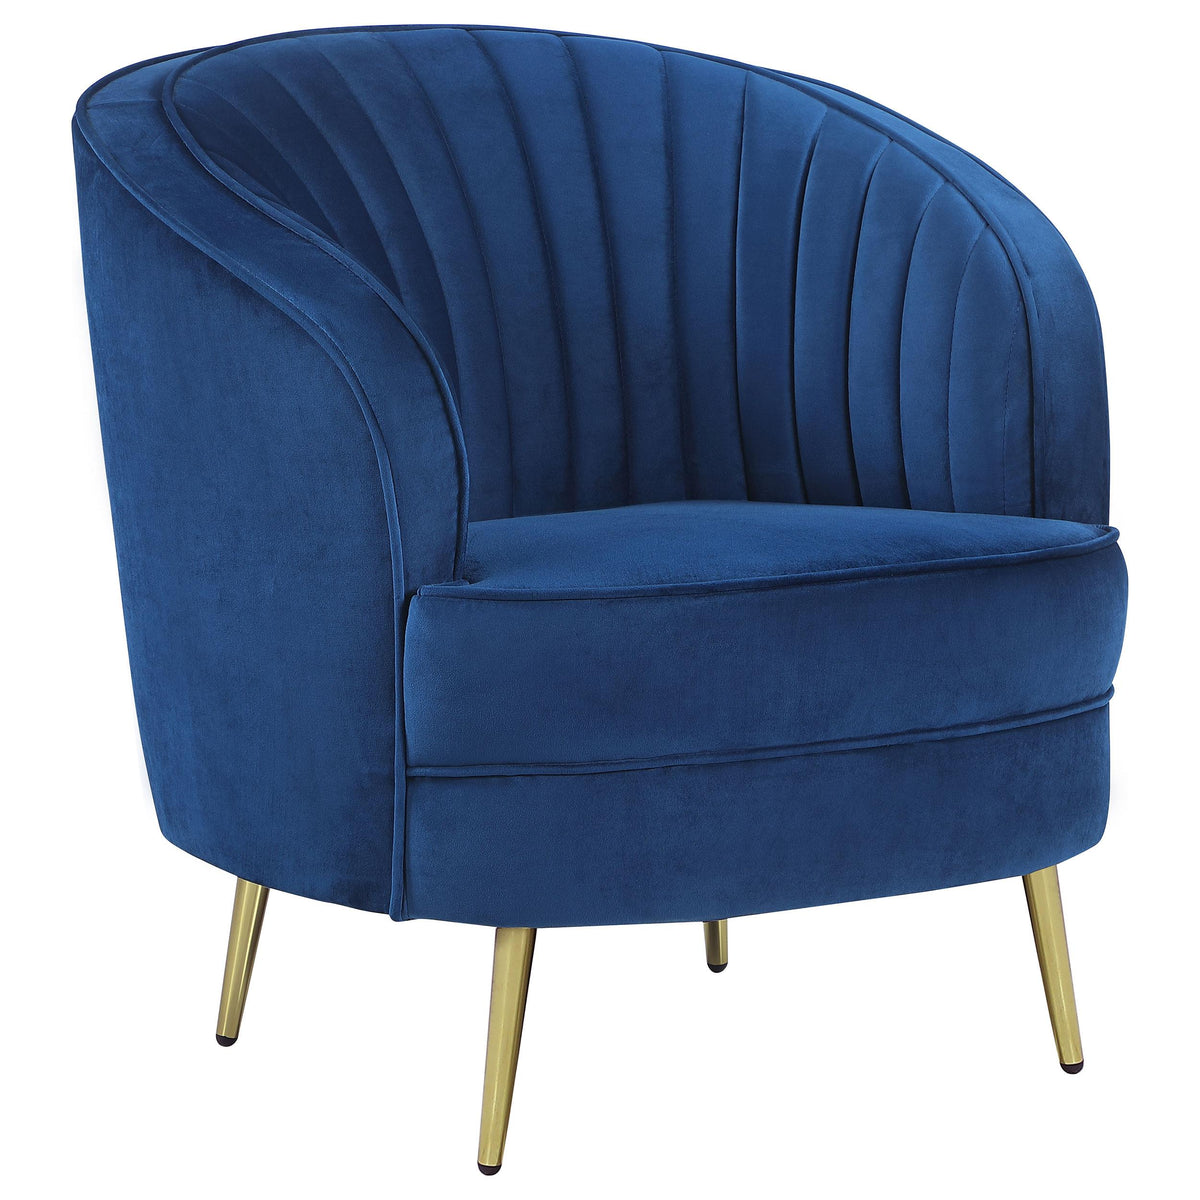 Sophia Upholstered Vertical Channel Tufted Chair Blue Sophia Upholstered Vertical Channel Tufted Chair Blue Half Price Furniture